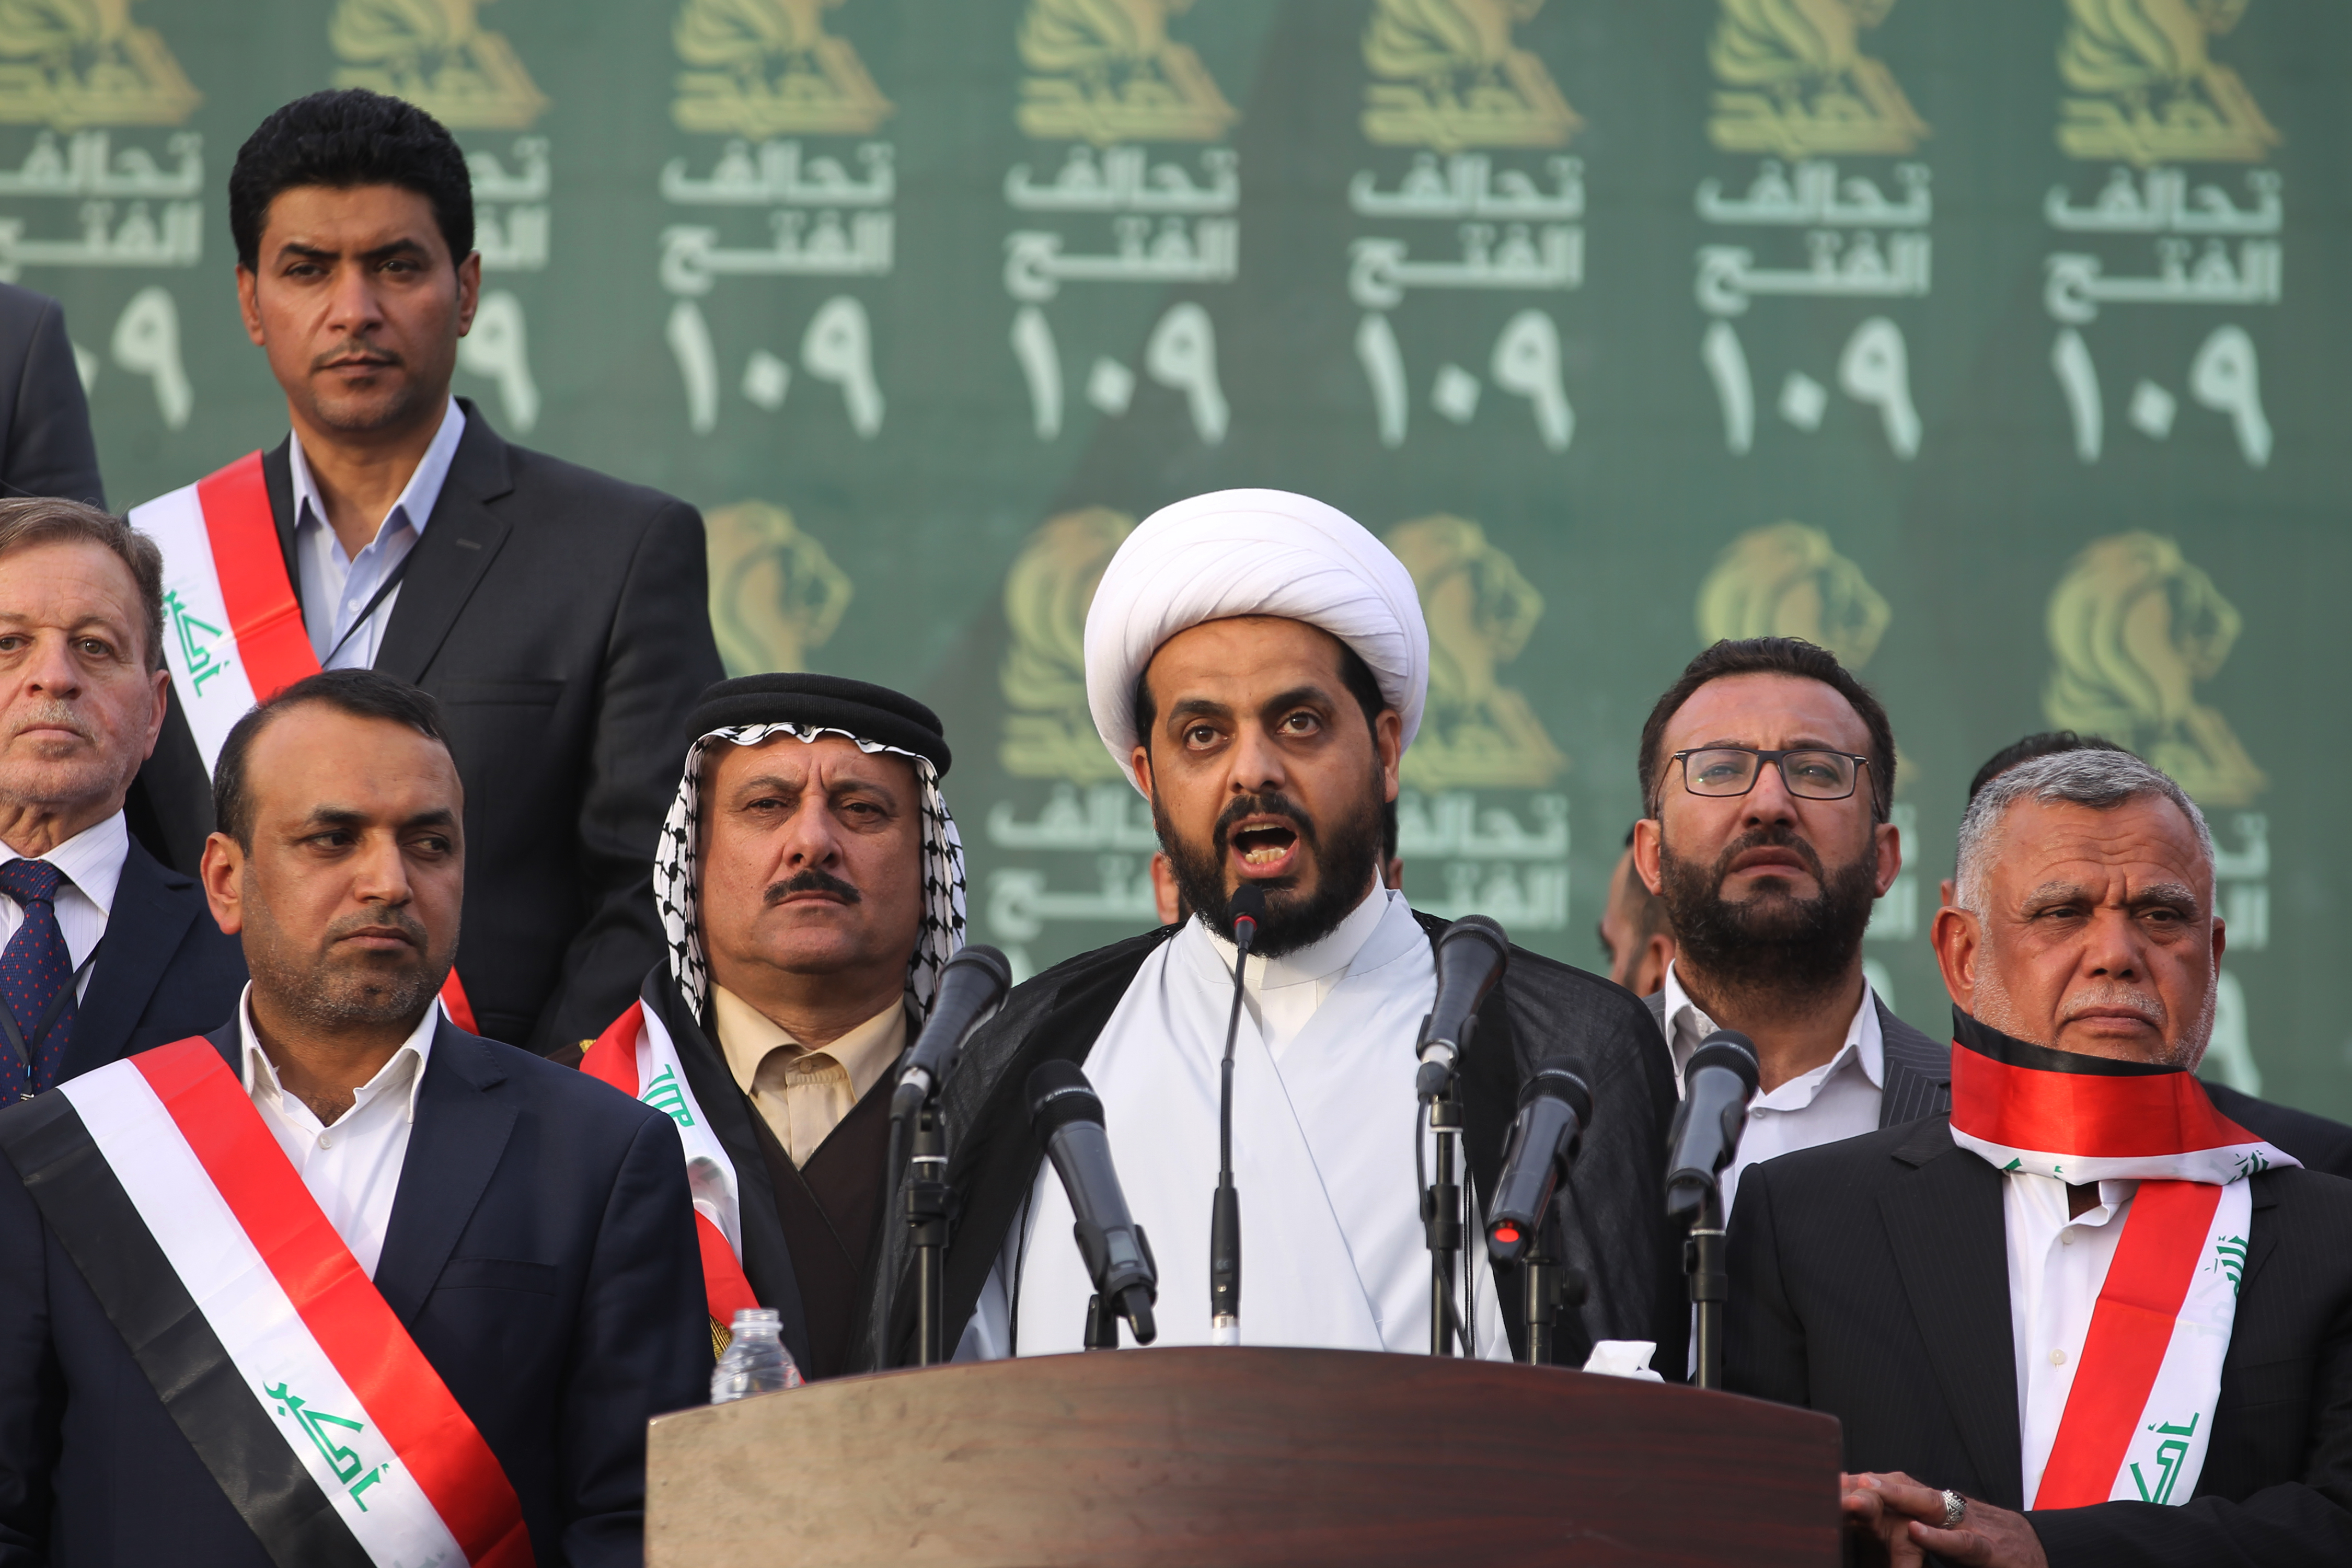 Qais al-Khazali, centre, leader of the Asa'ib Ahl al-Haq, gives a speech in Baghdad during a campaign rally for the Fateh Alliance, a coalition of Iranian-supported militia groups (AFP)